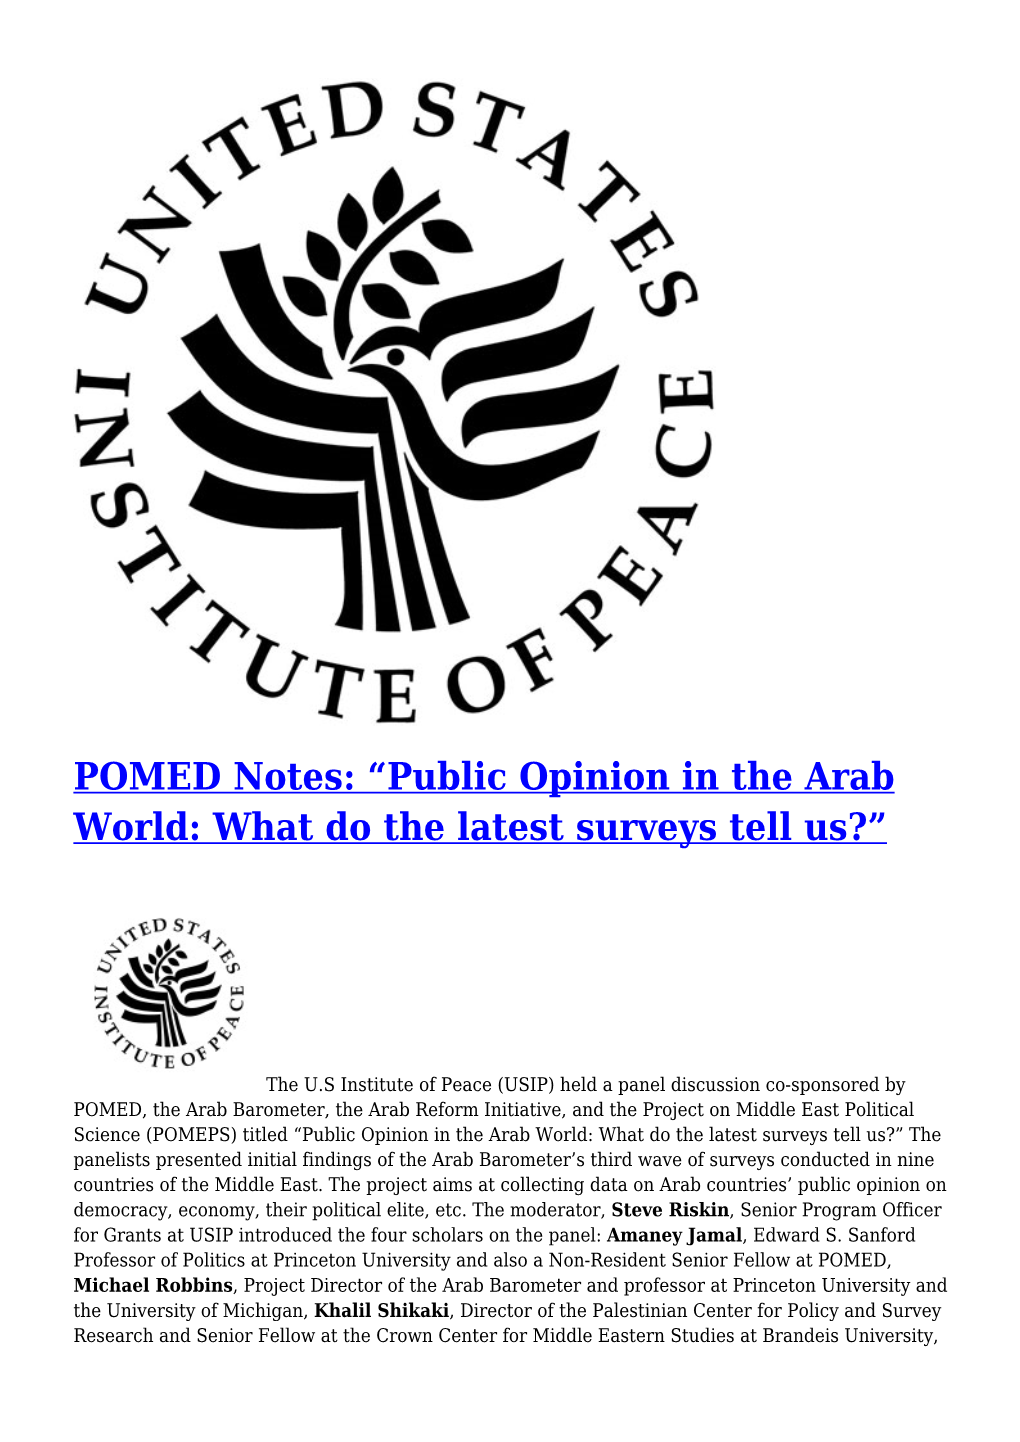 POMED Notes: “Public Opinion in the Arab World: What Do the Latest Surveys Tell Us?”